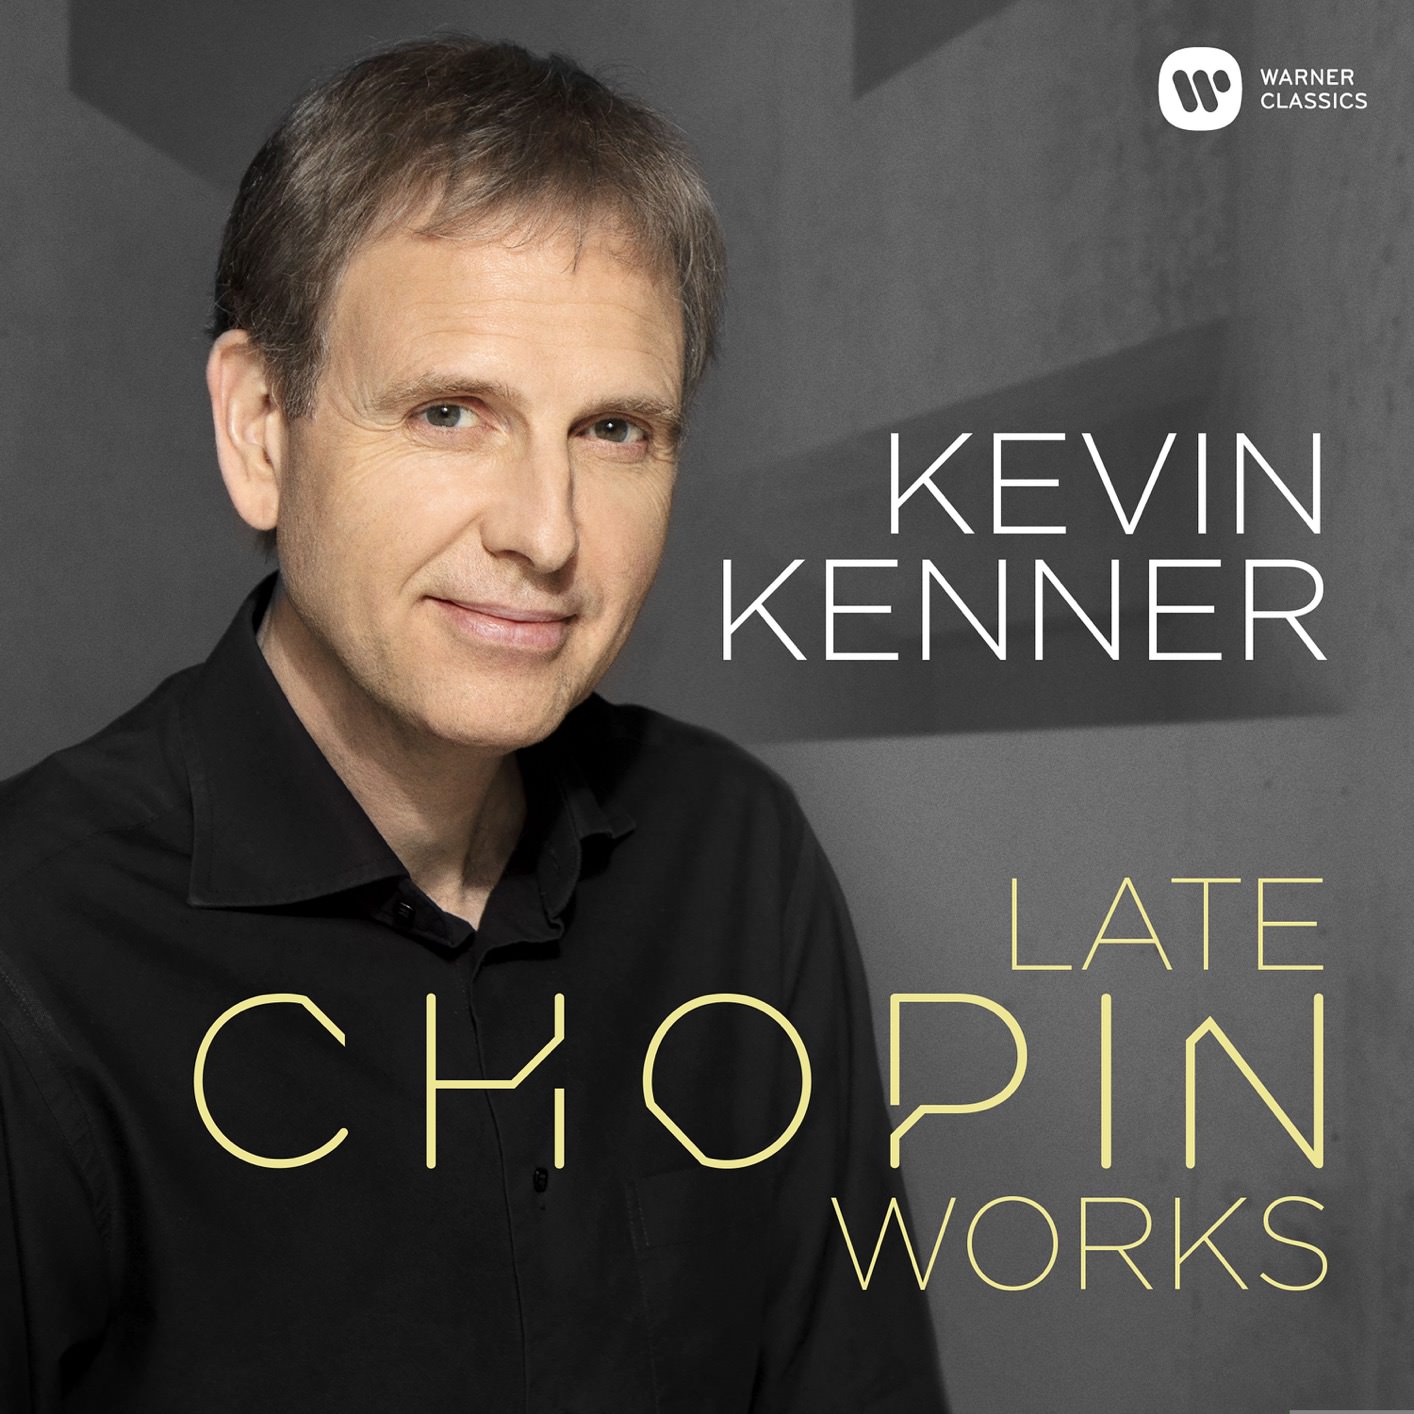 Kevin Kenner - Late Chopin Works (2018) [FLAC 24bit/96kHz]